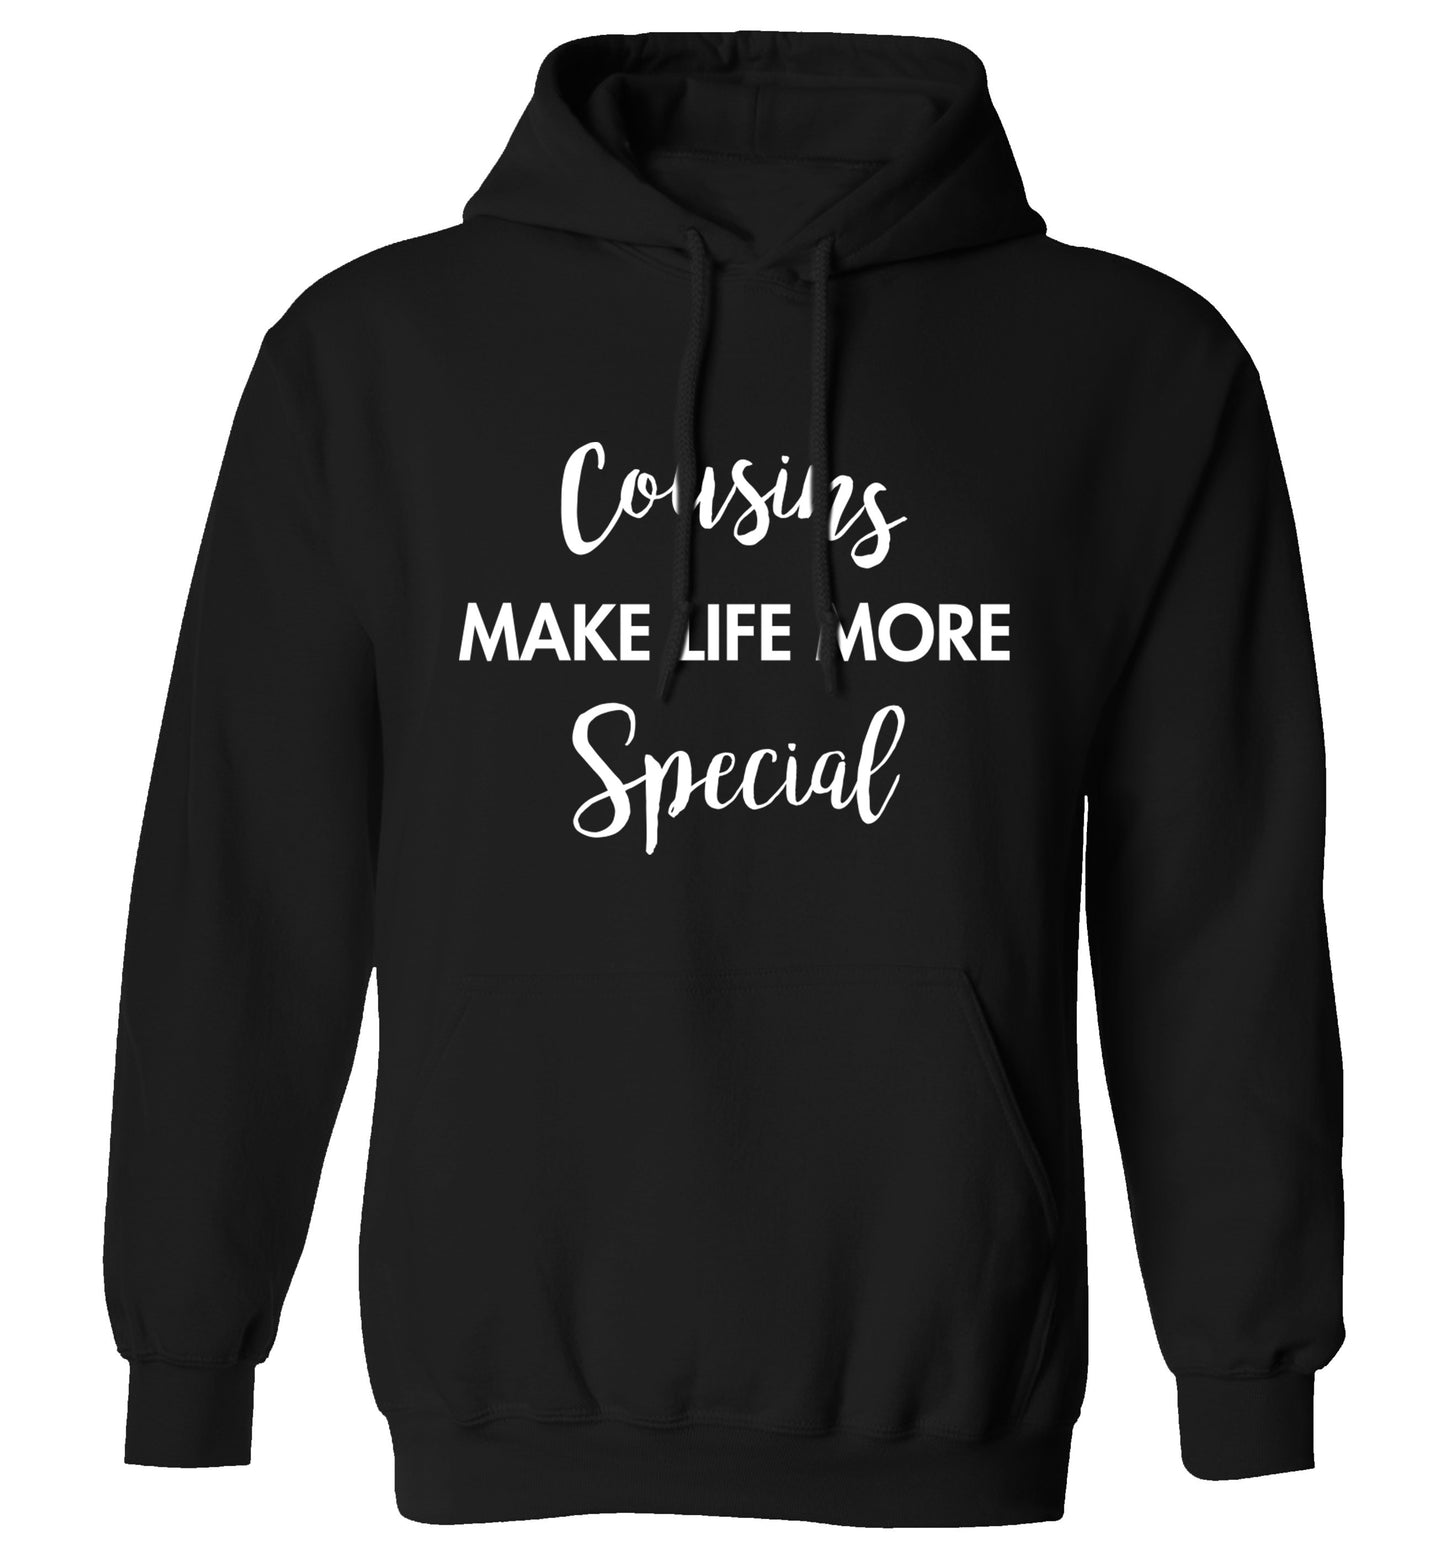 Cousins make life more special adults unisex black hoodie 2XL